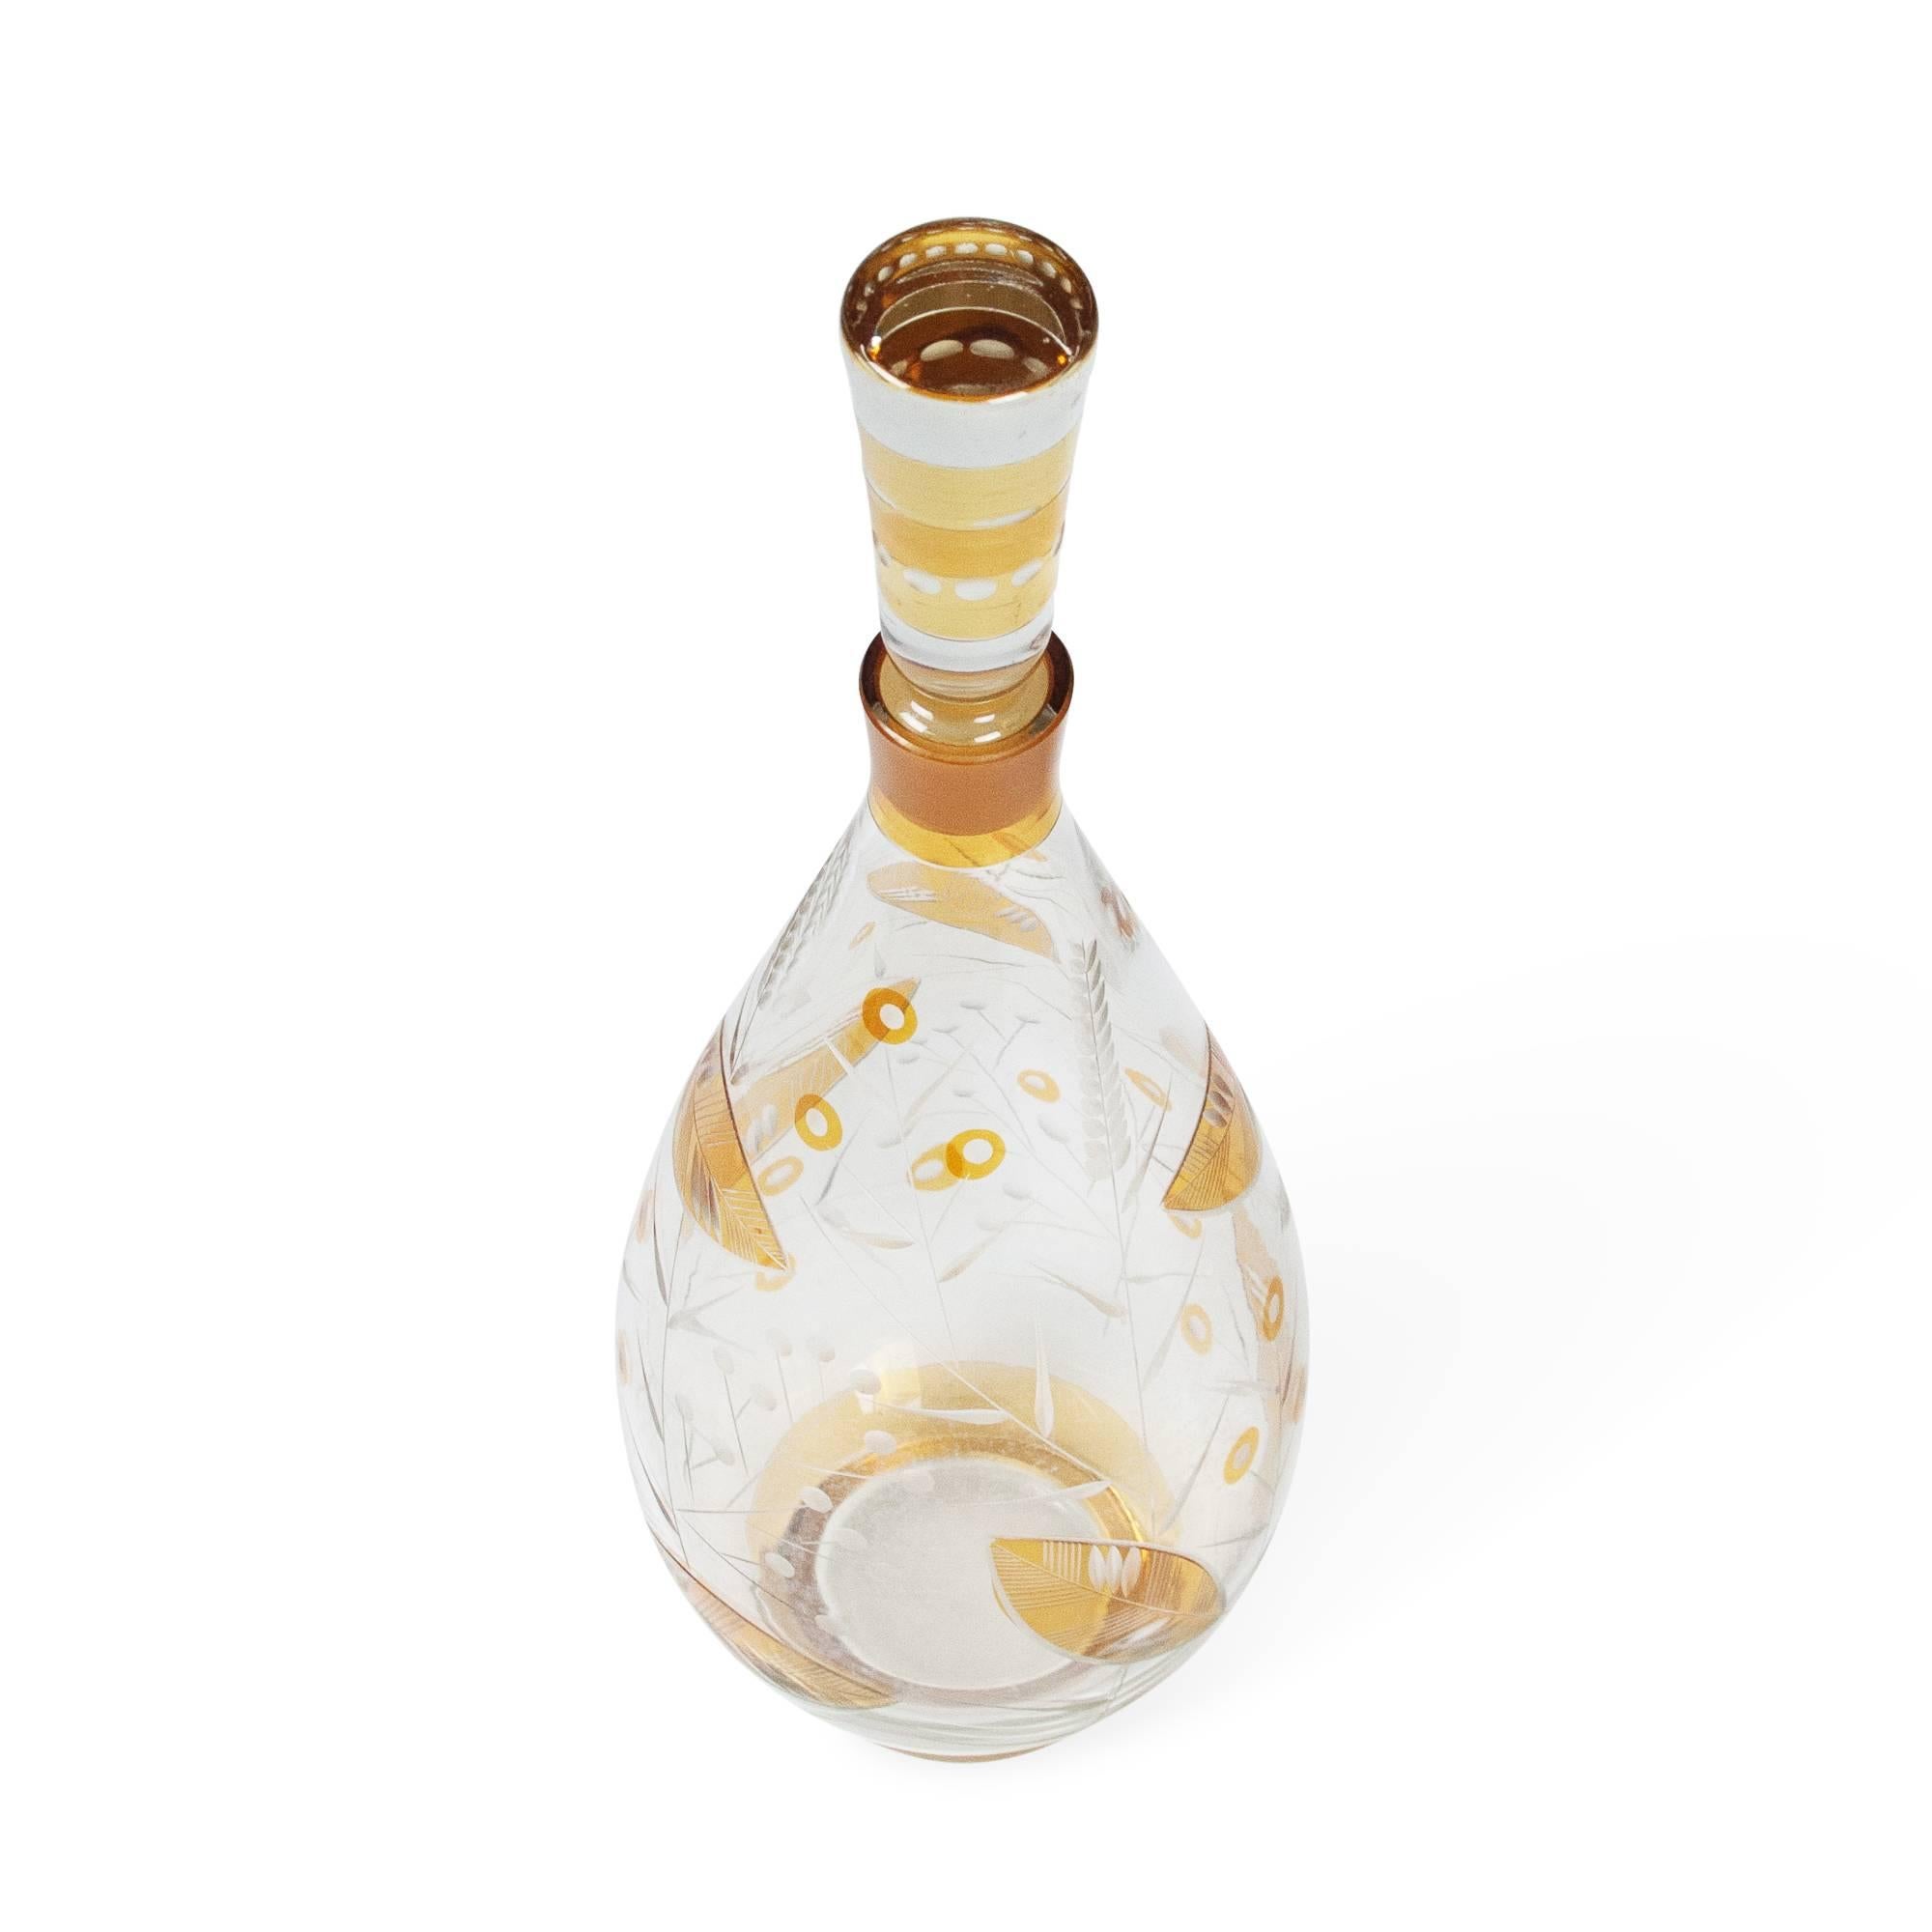 Clear glass bottle with stopper, having amber foliate coloring, Bohemian, early 20th century. Measures: 14 in. height (including stopper), 4 1/2 in. diameter.